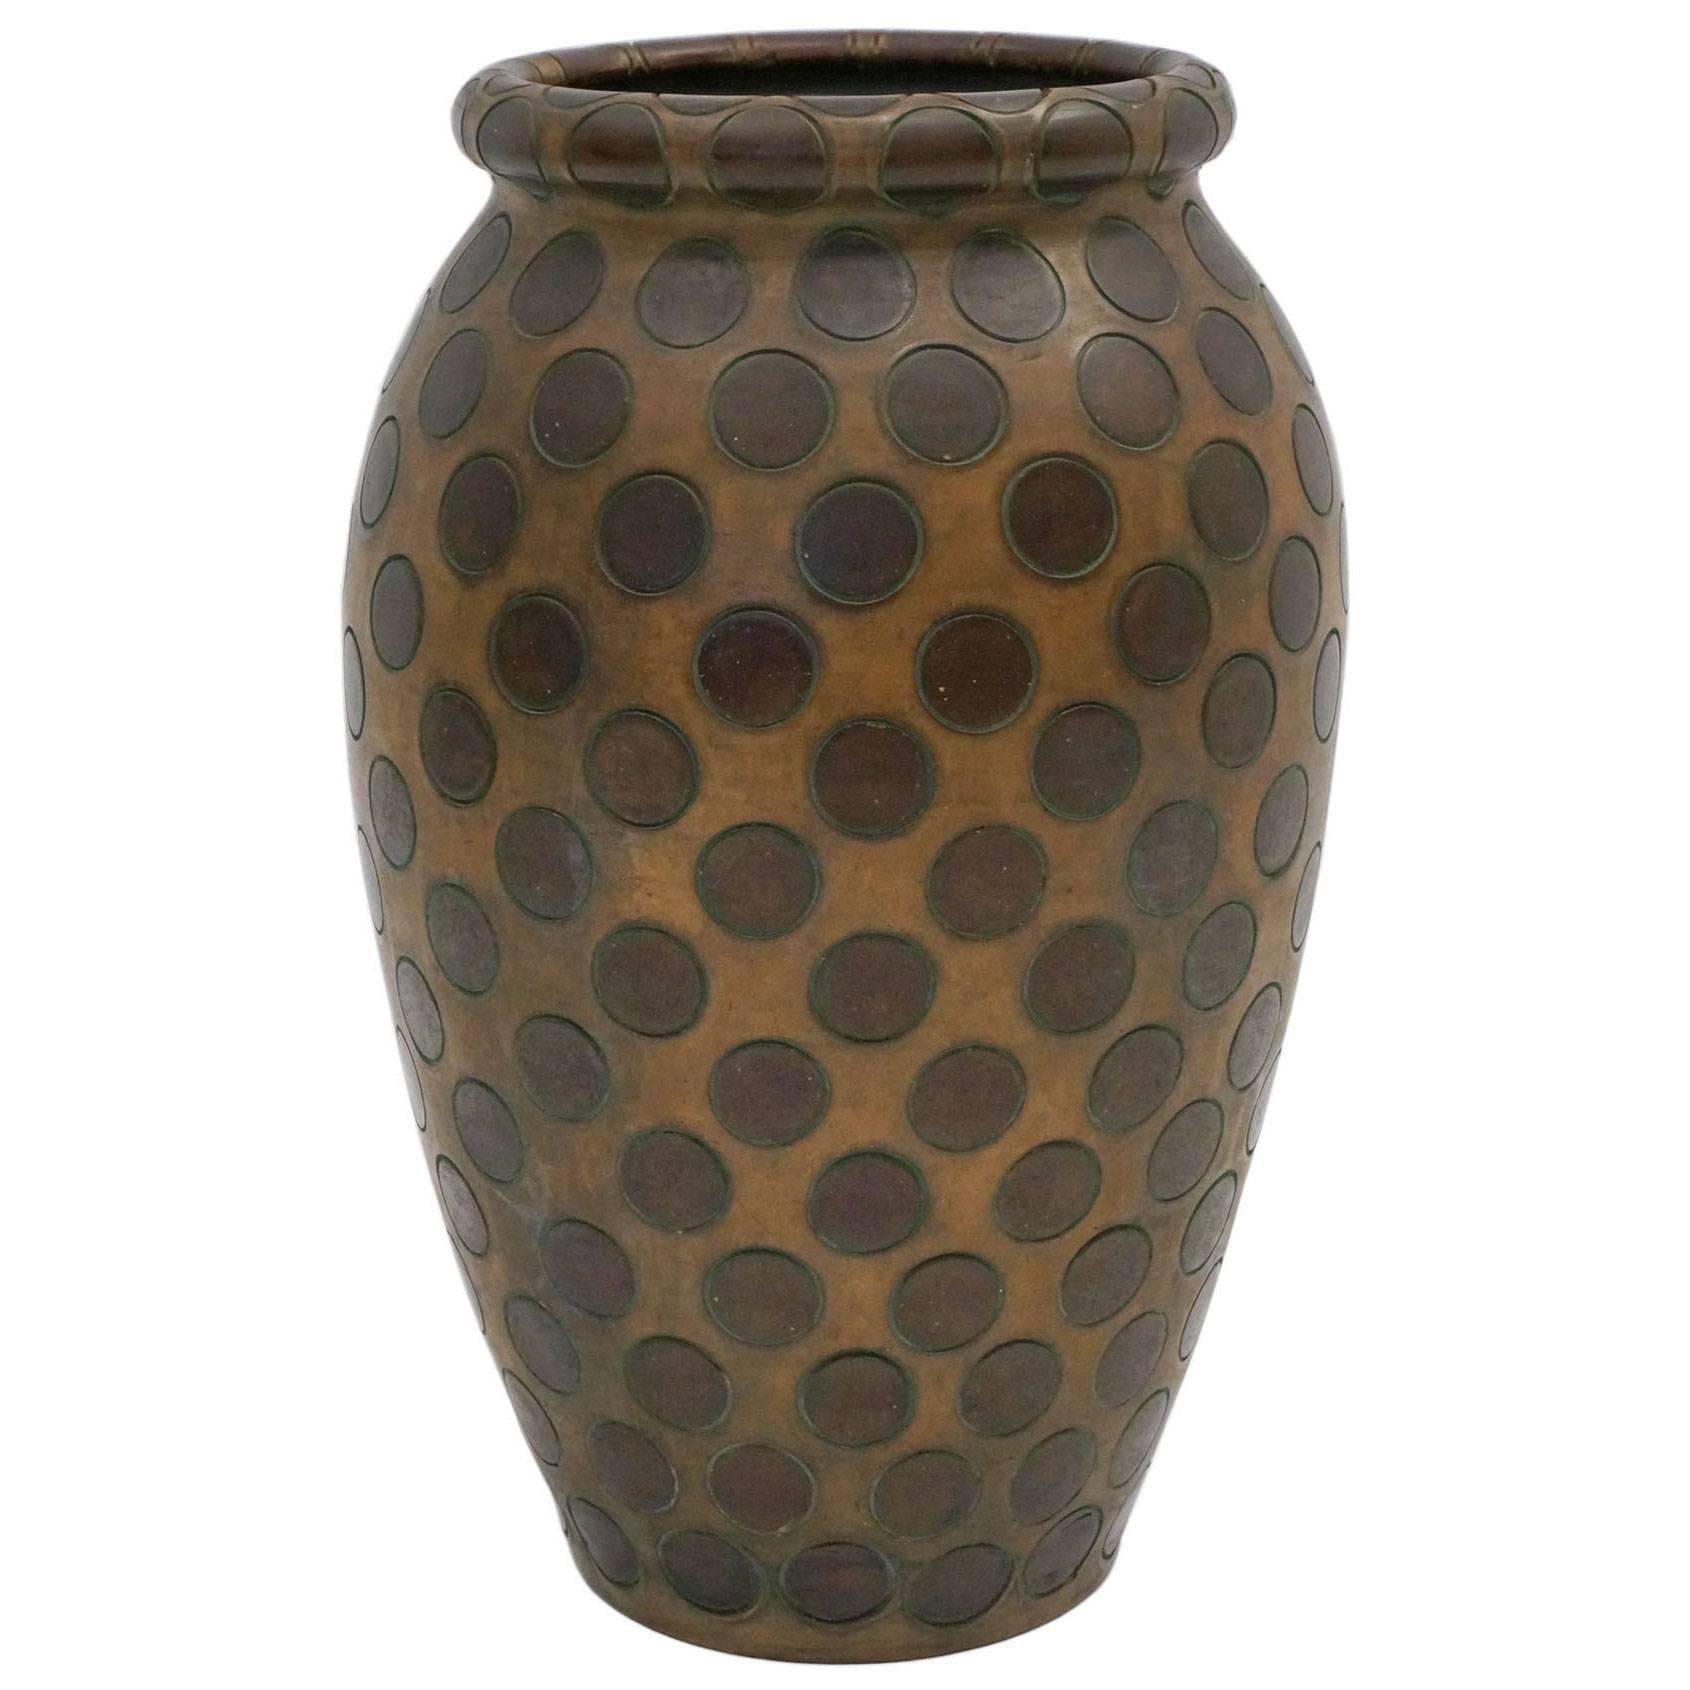 Large-Scale Ceramic Vase or Umbrella Stand with Dots by Zaccagnini For Sale